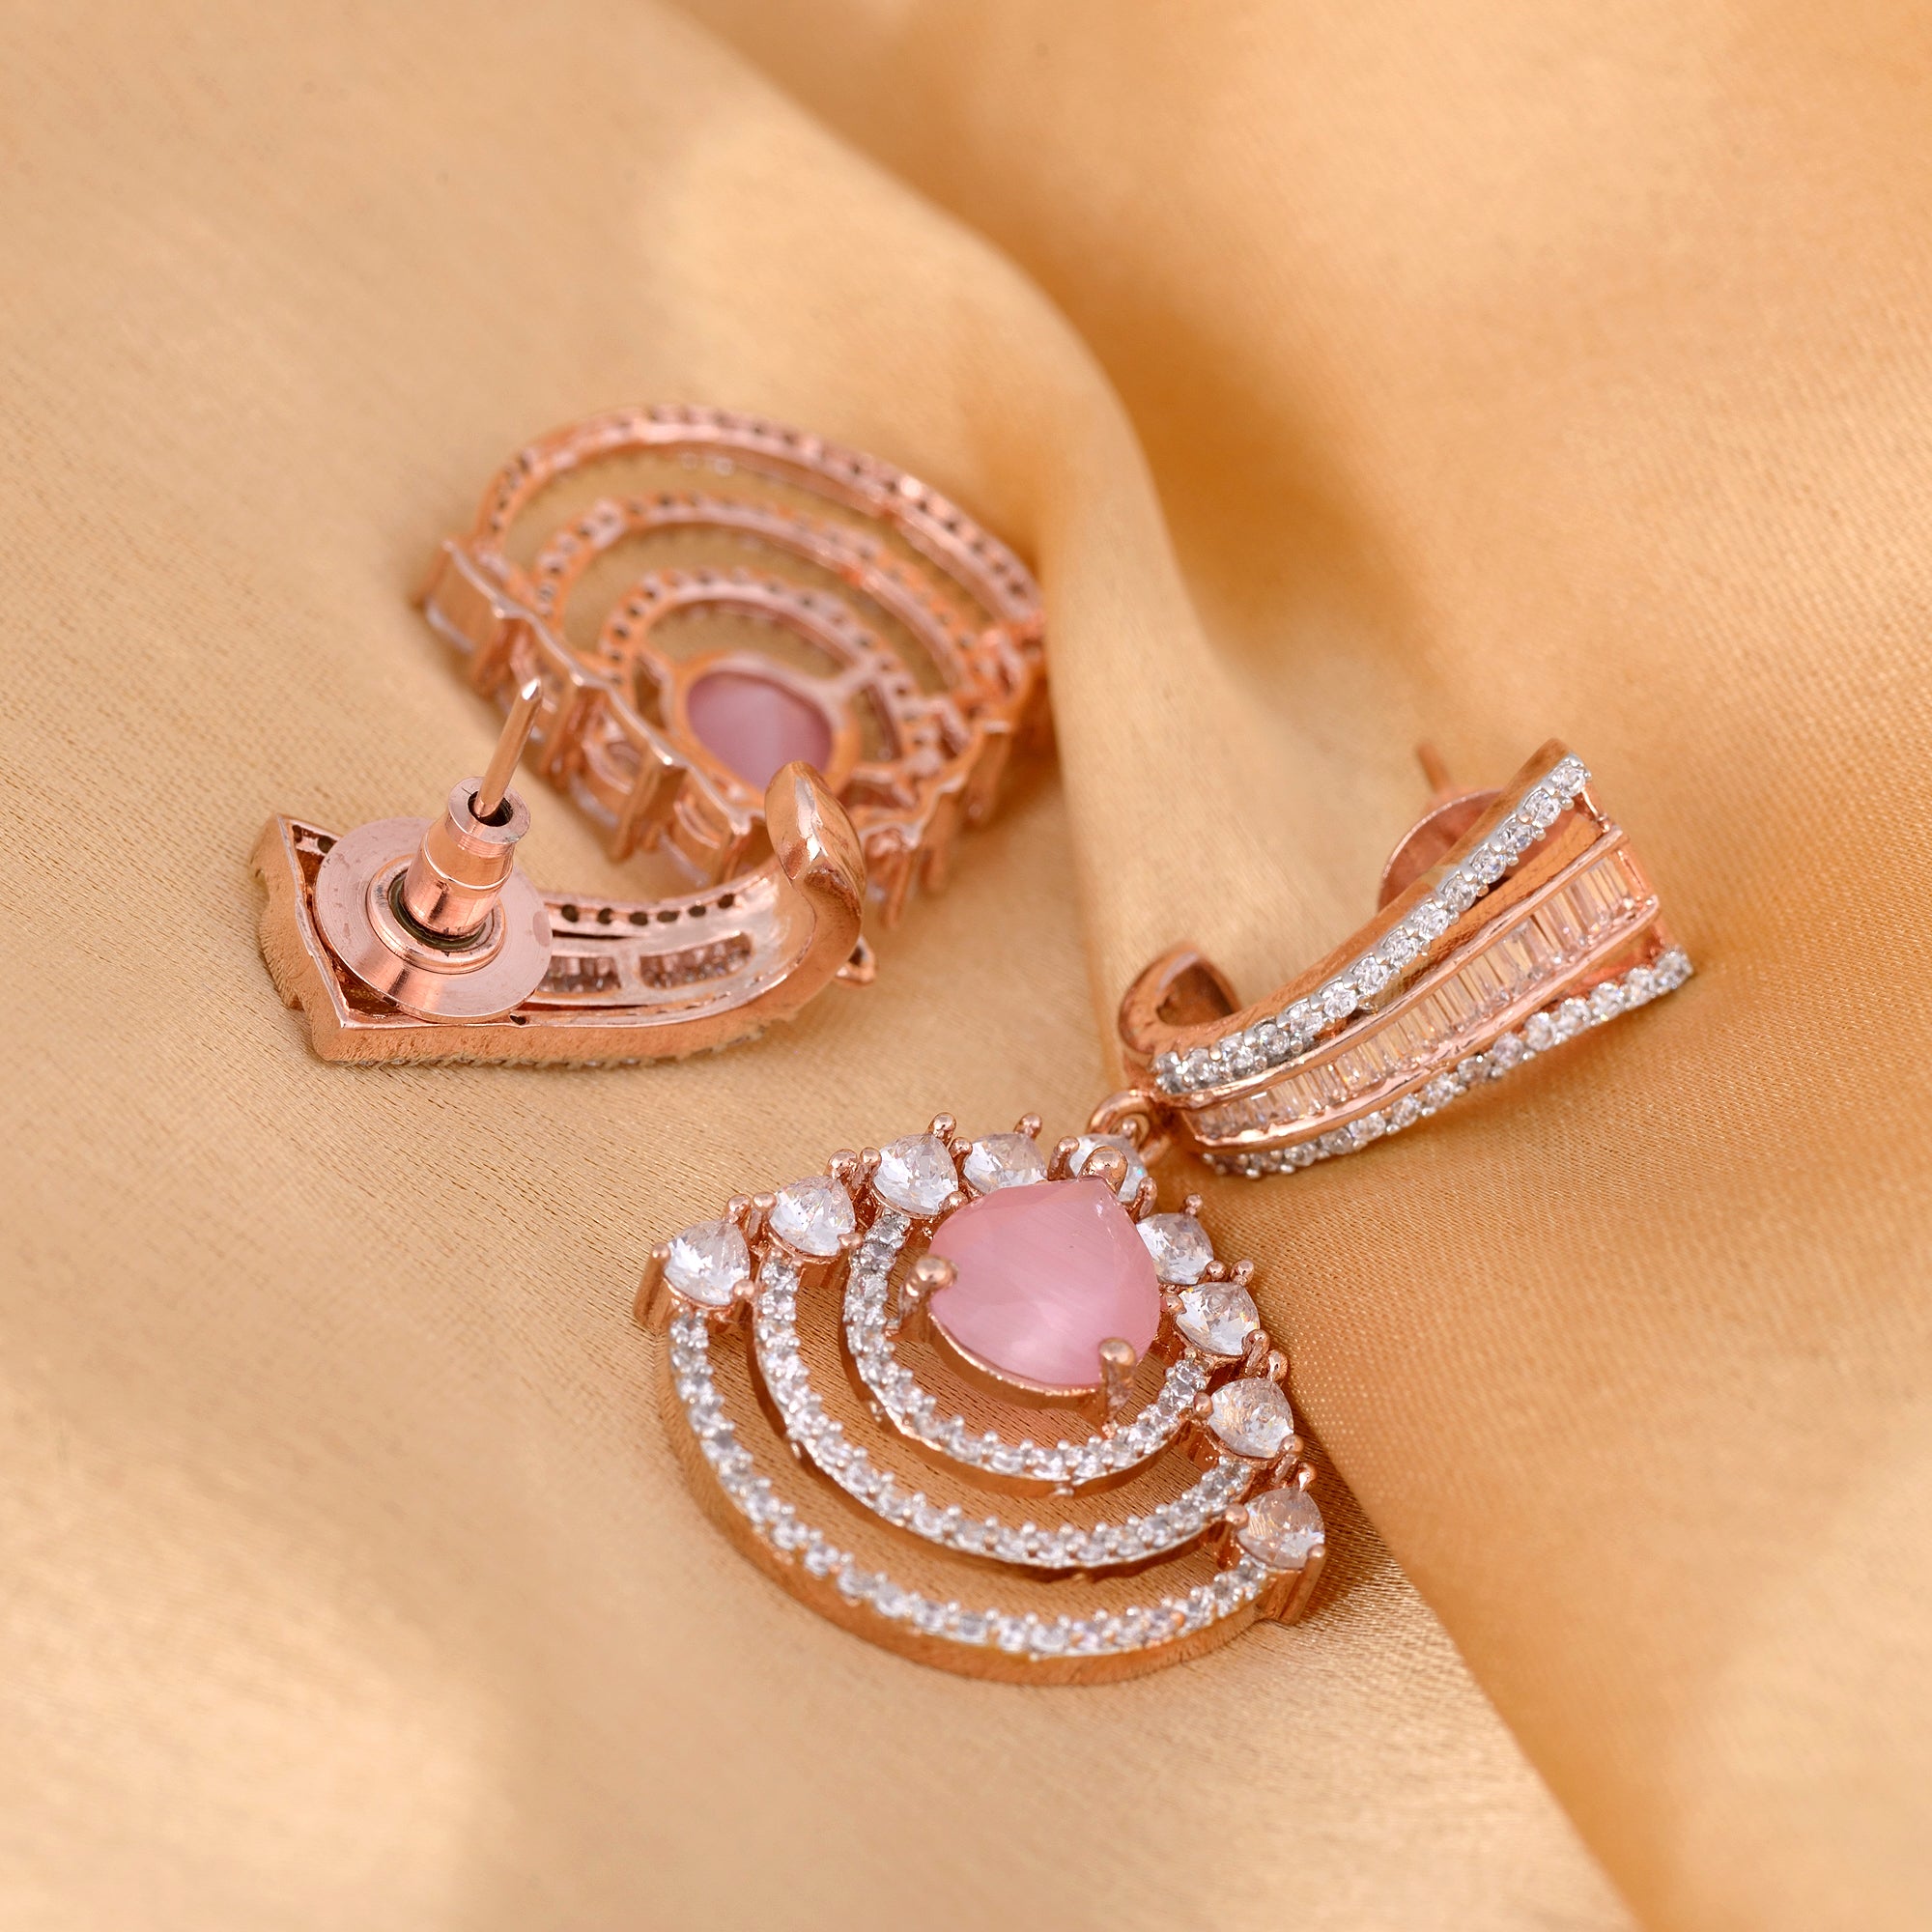 Modern Rose Quartz Danglers Pastel Pink Drop Earrings Ad Studded Rose Gold Plated for Women and Girls - Saraf RS Jewellery